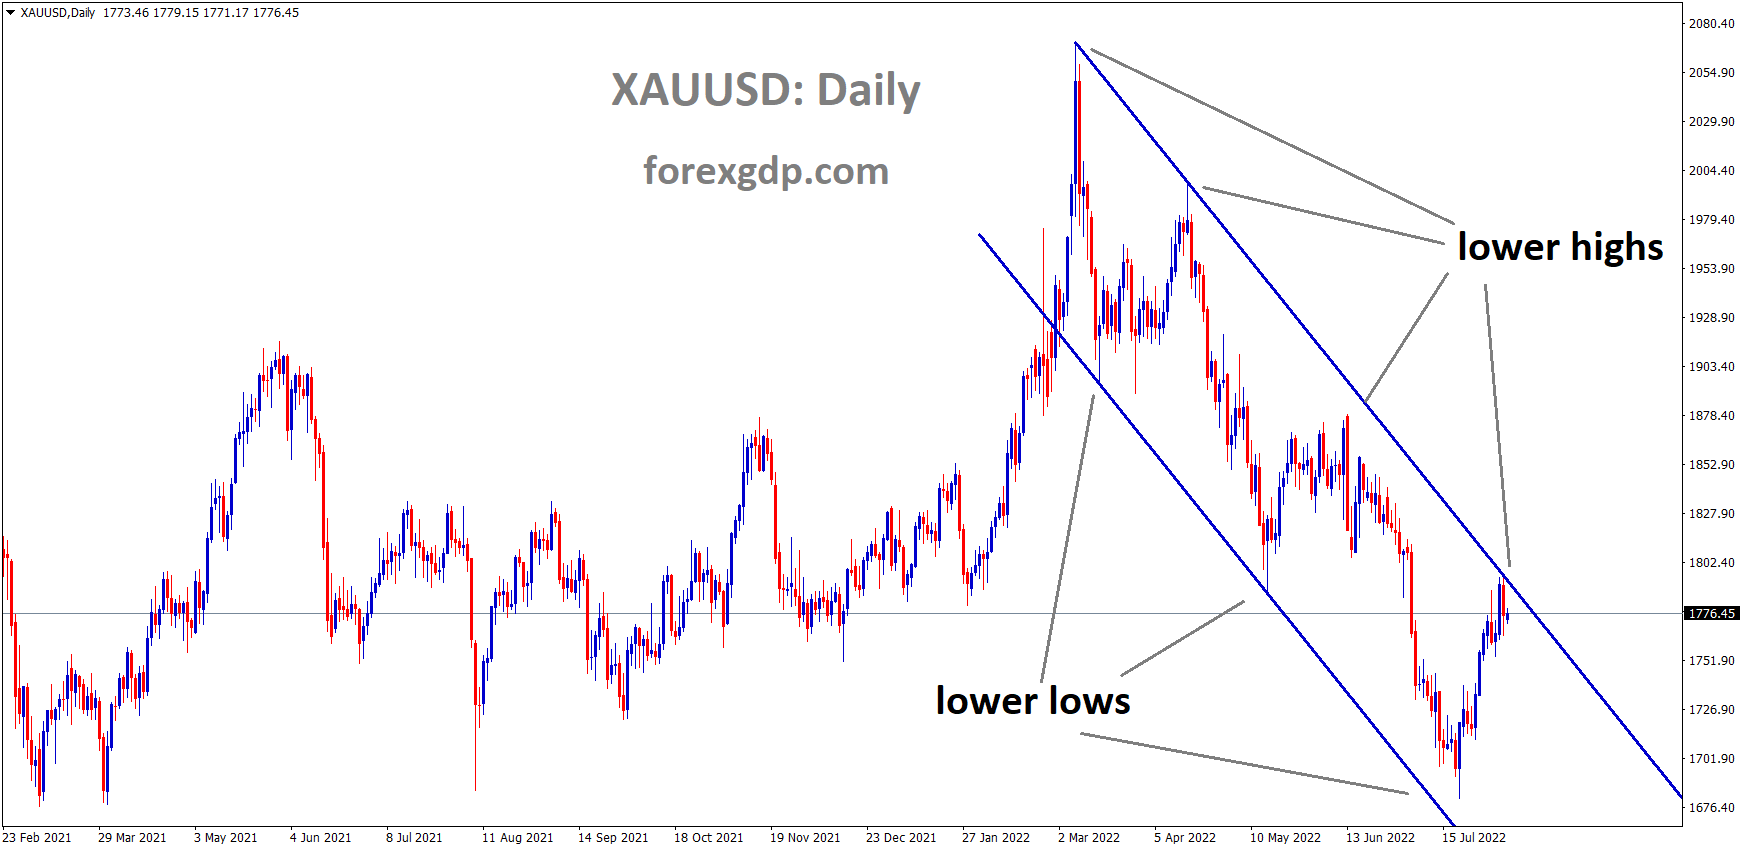 XAUUSD Gold price is moving in the Descending channel and the Market has fallen from the Lower high area of the channel